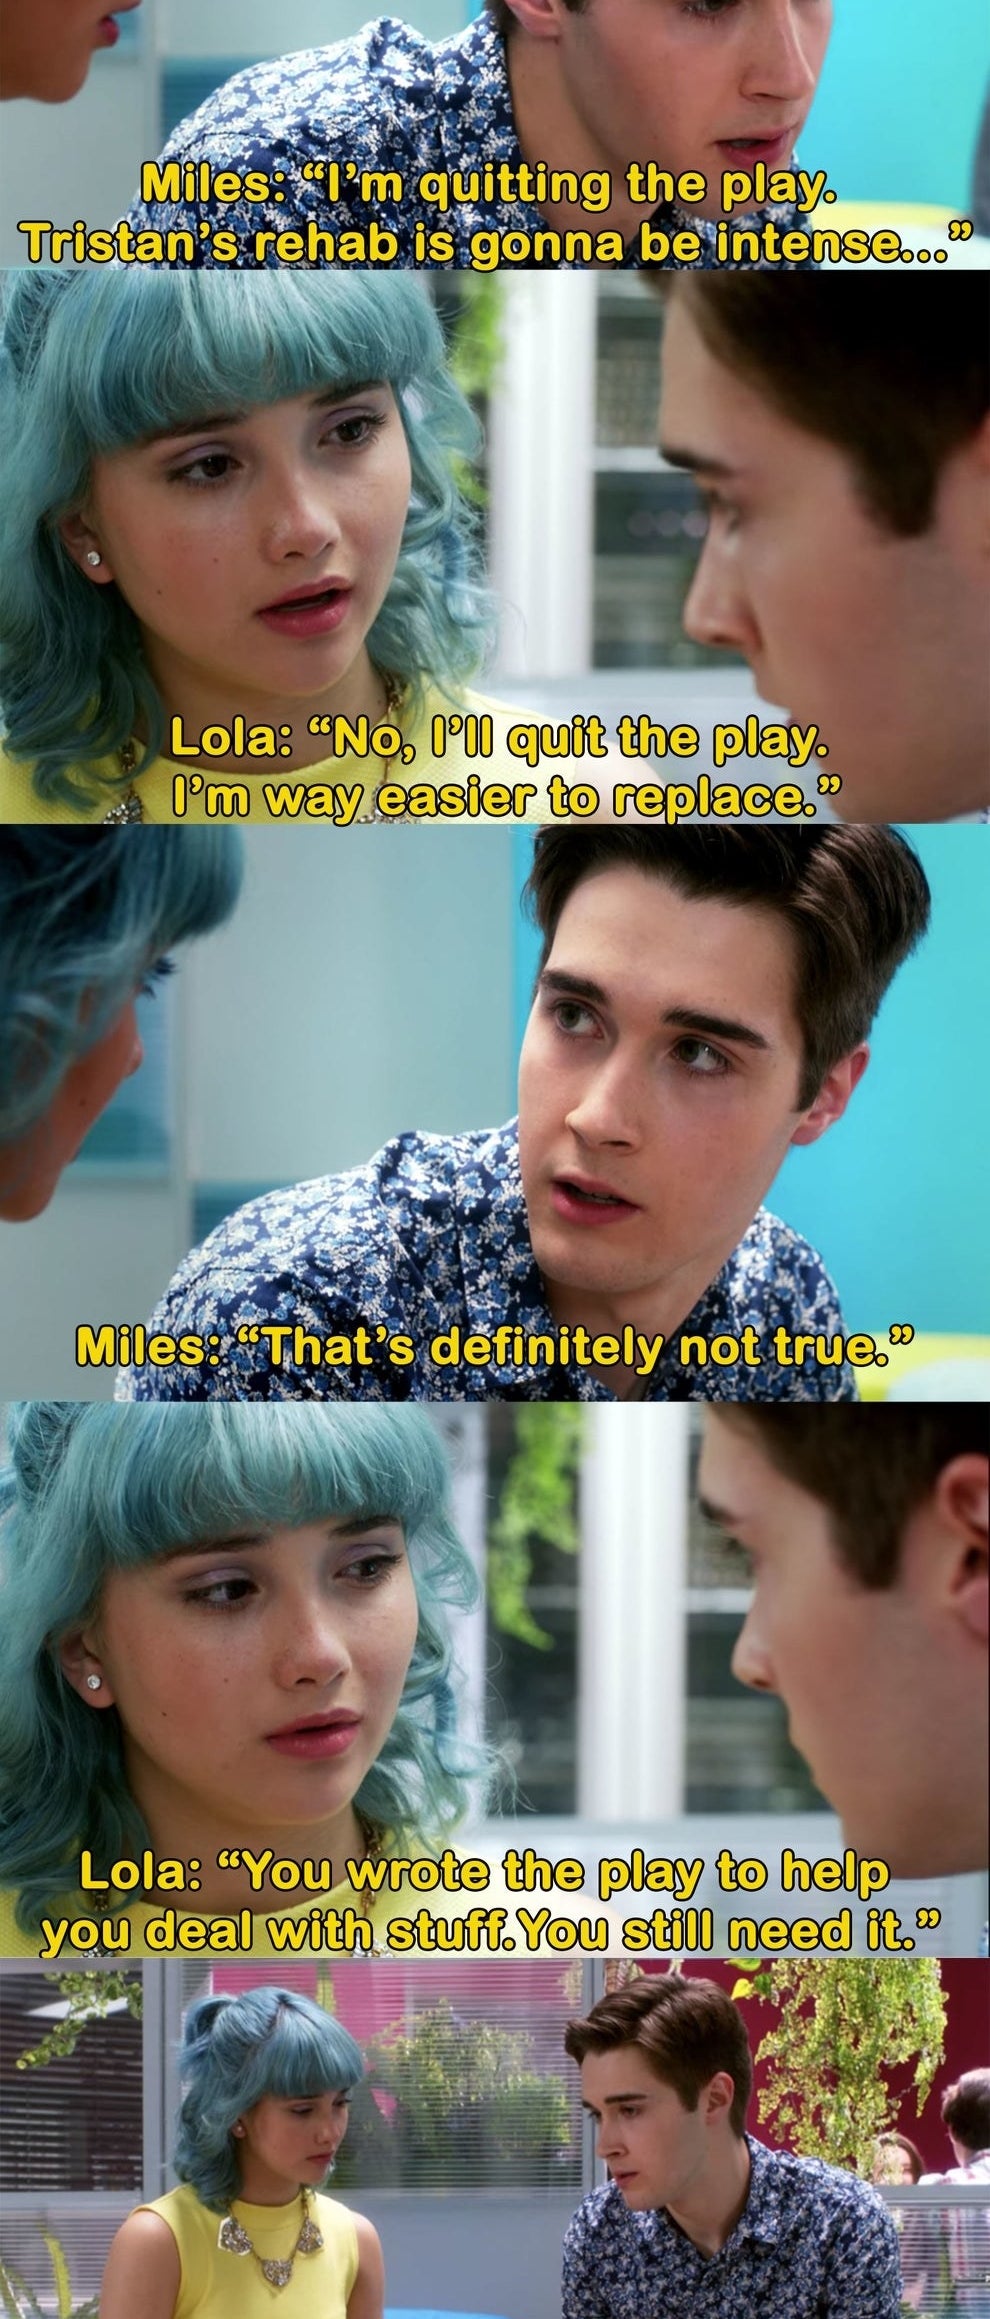 Lola: &quot;I&#x27;ll quit the play. I&#x27;m easier to replace&quot; Miles: &quot;that&#x27;s not true&quot; Lola: &quot;You wrote the play to help you deal with stuff. You still need it.&quot; Miles: &quot;Okay, then we both stay, I don&#x27;t trust anyone else to play Hope.&quot;